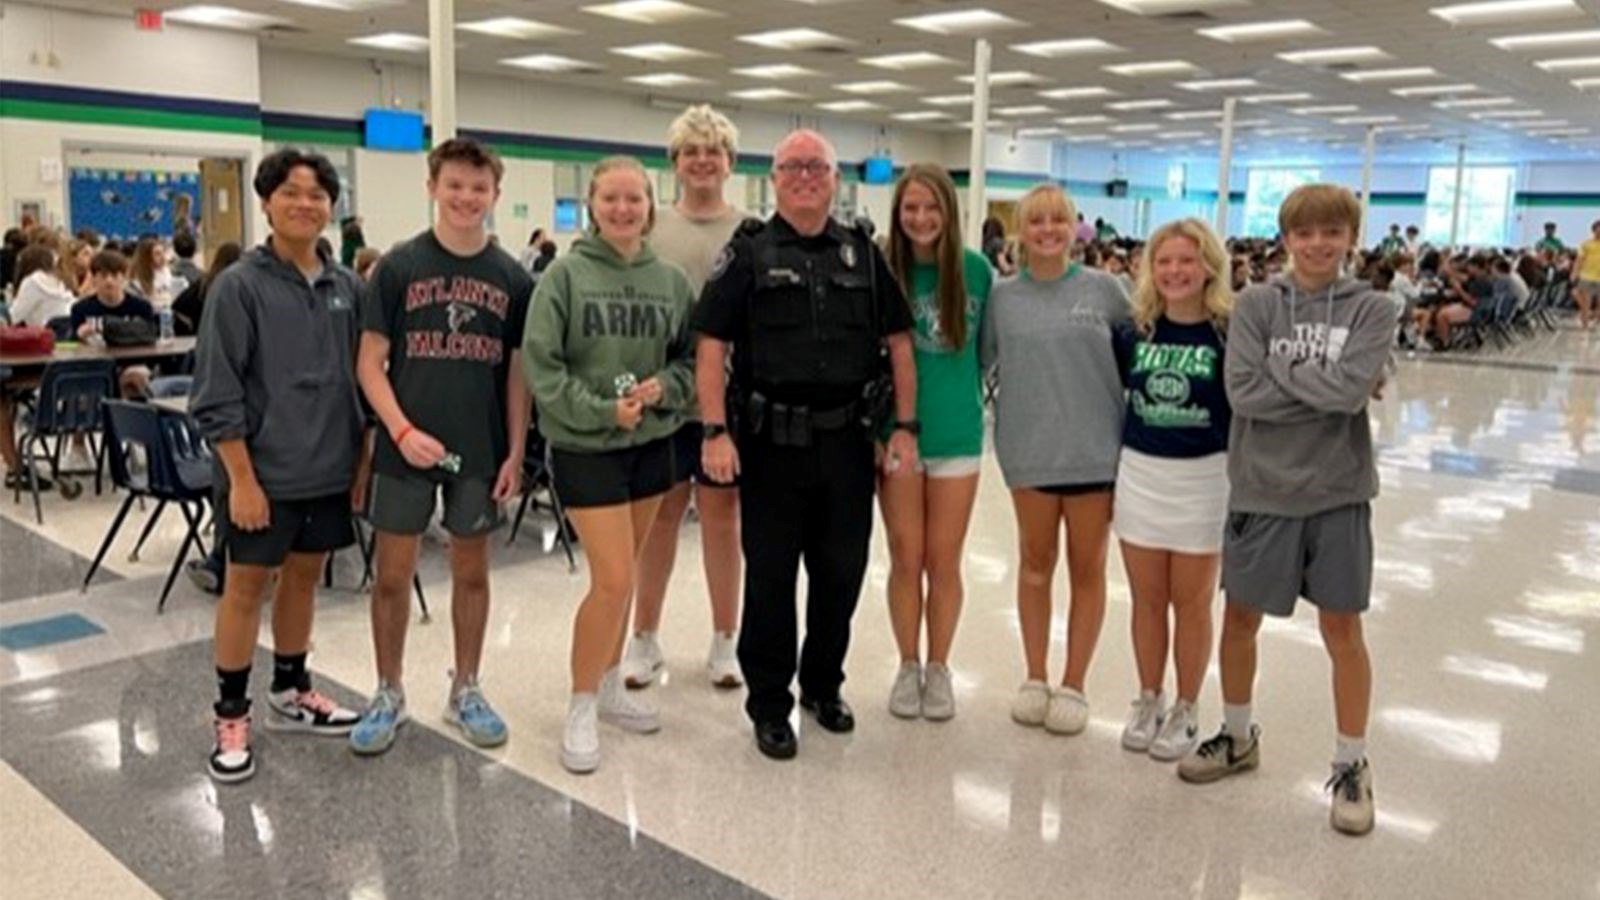 Officer Dunkerton and students